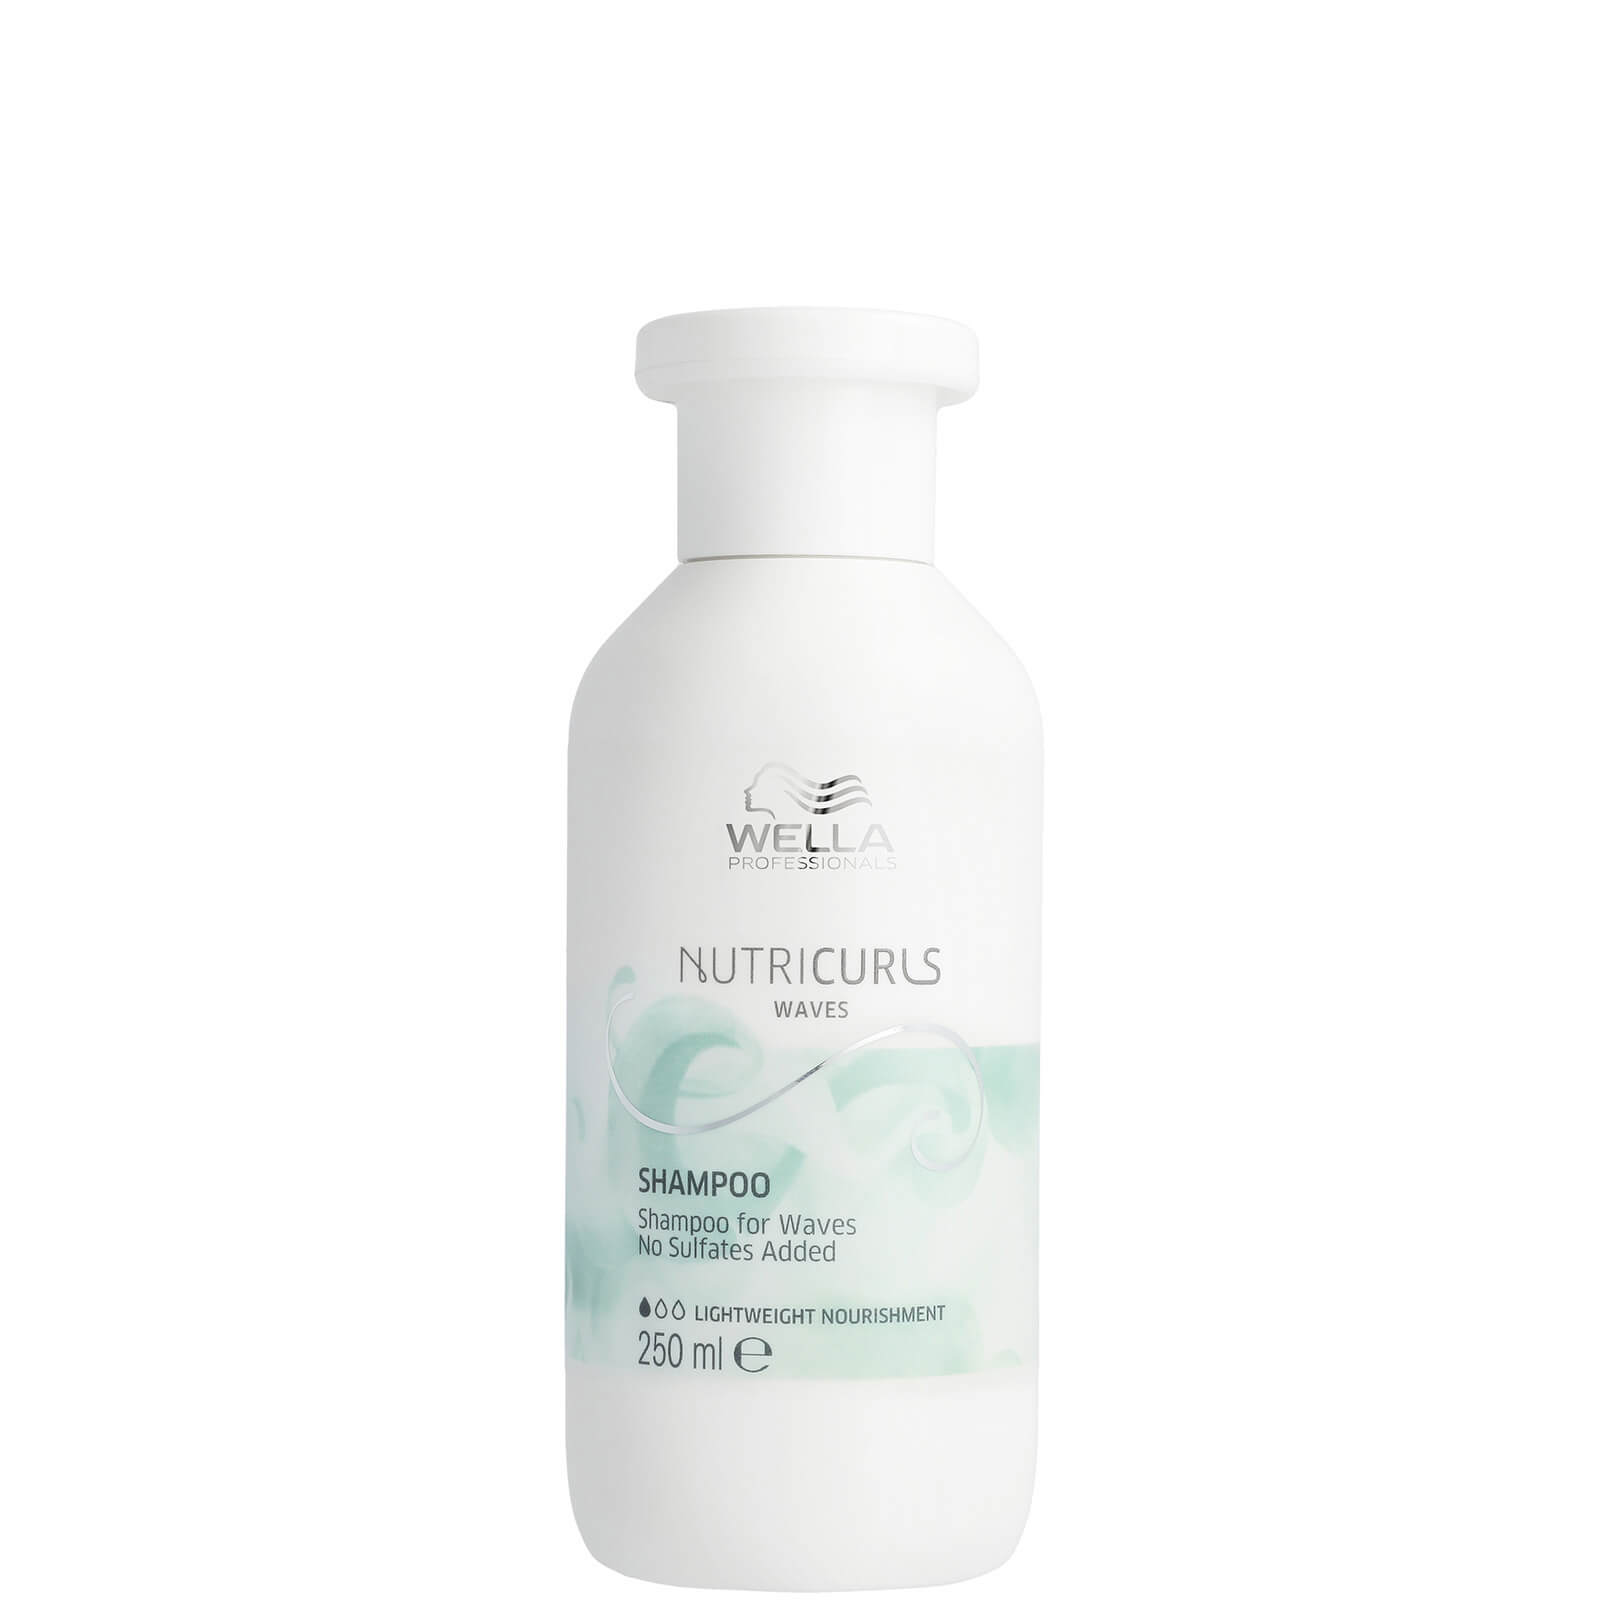 Photos - Hair Product Wella Professionals Nutricurls Shampoo for Waves 250ml 99350104820 